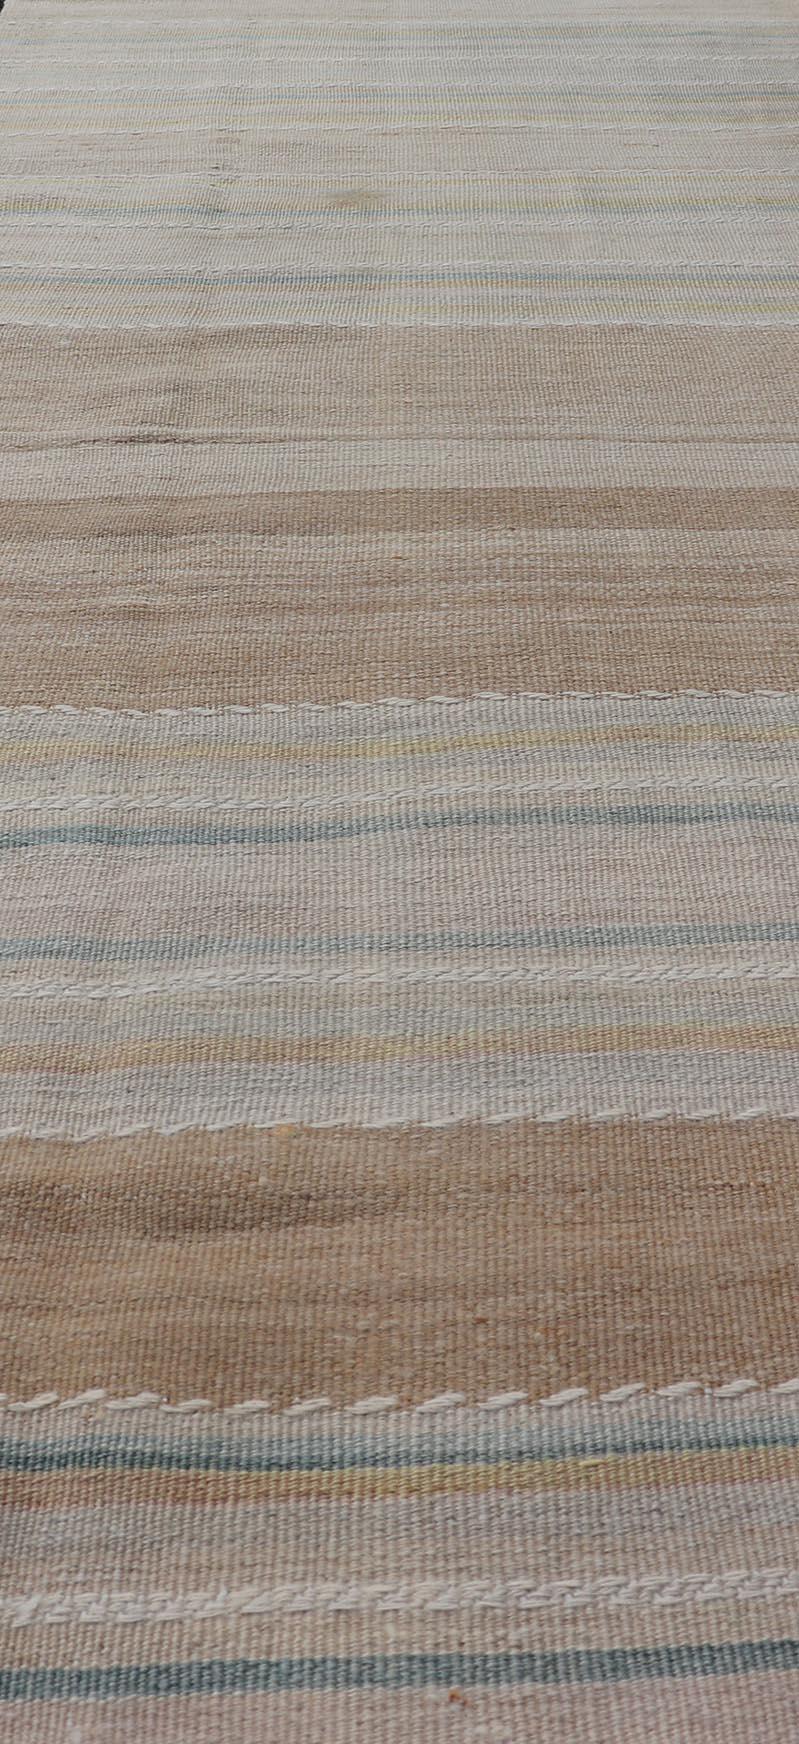 Vintage Turkish Kilim Rug with Horizontal Stipes in Light Brown, Blue, Taupe For Sale 1